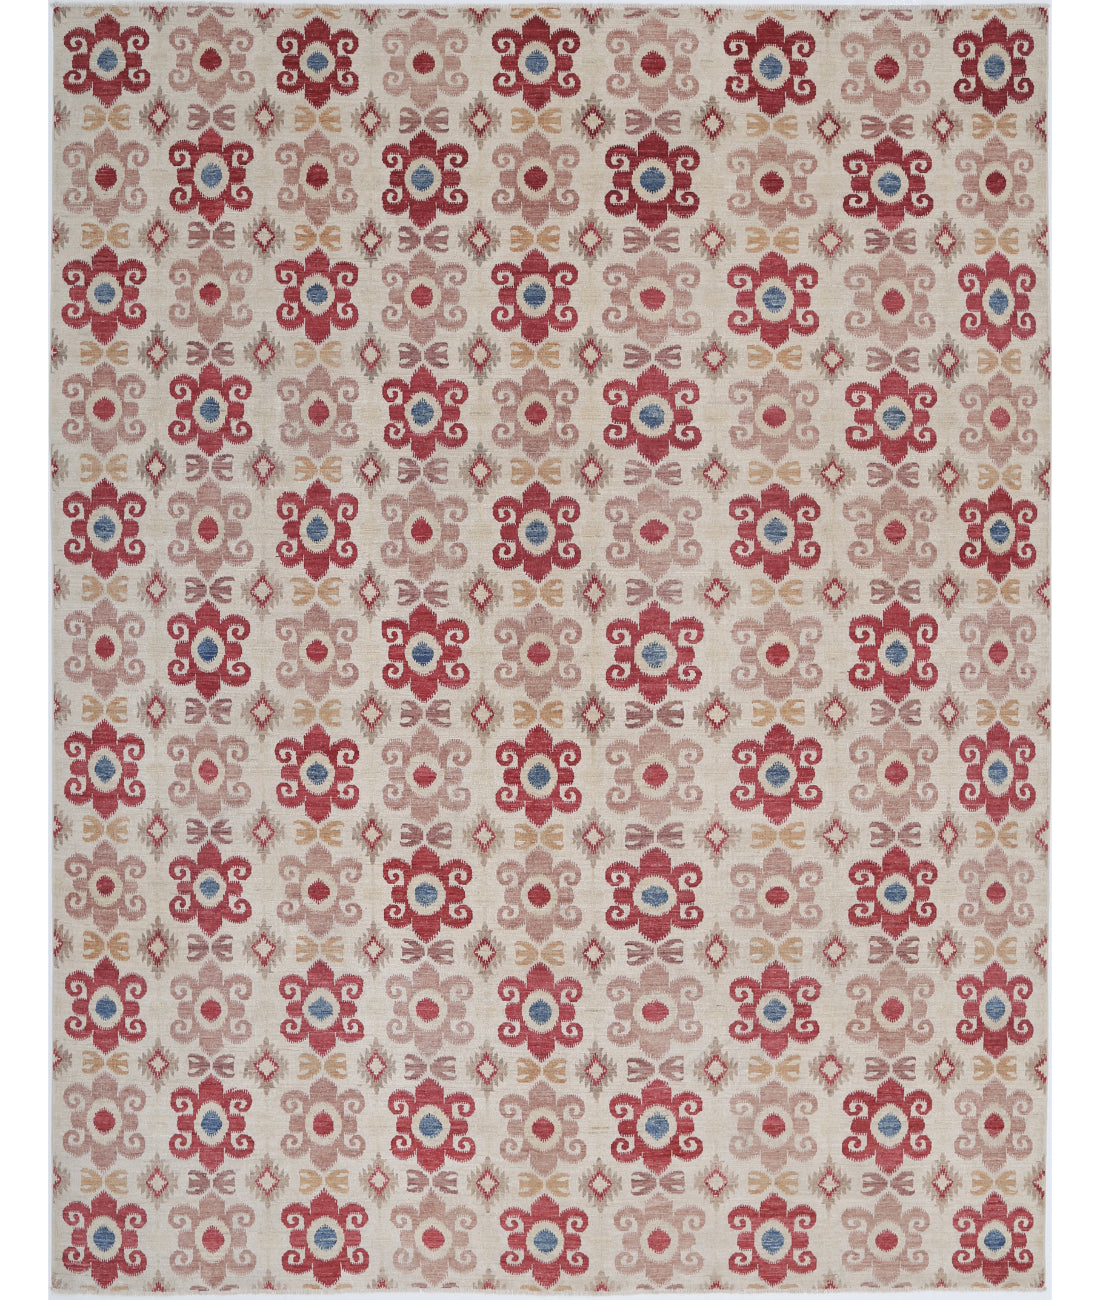 Hand Knotted Ikat Wool Rug - 8'9'' x 11'3'' 8'9'' x 11'3'' (263 X 338) / Ivory / Red